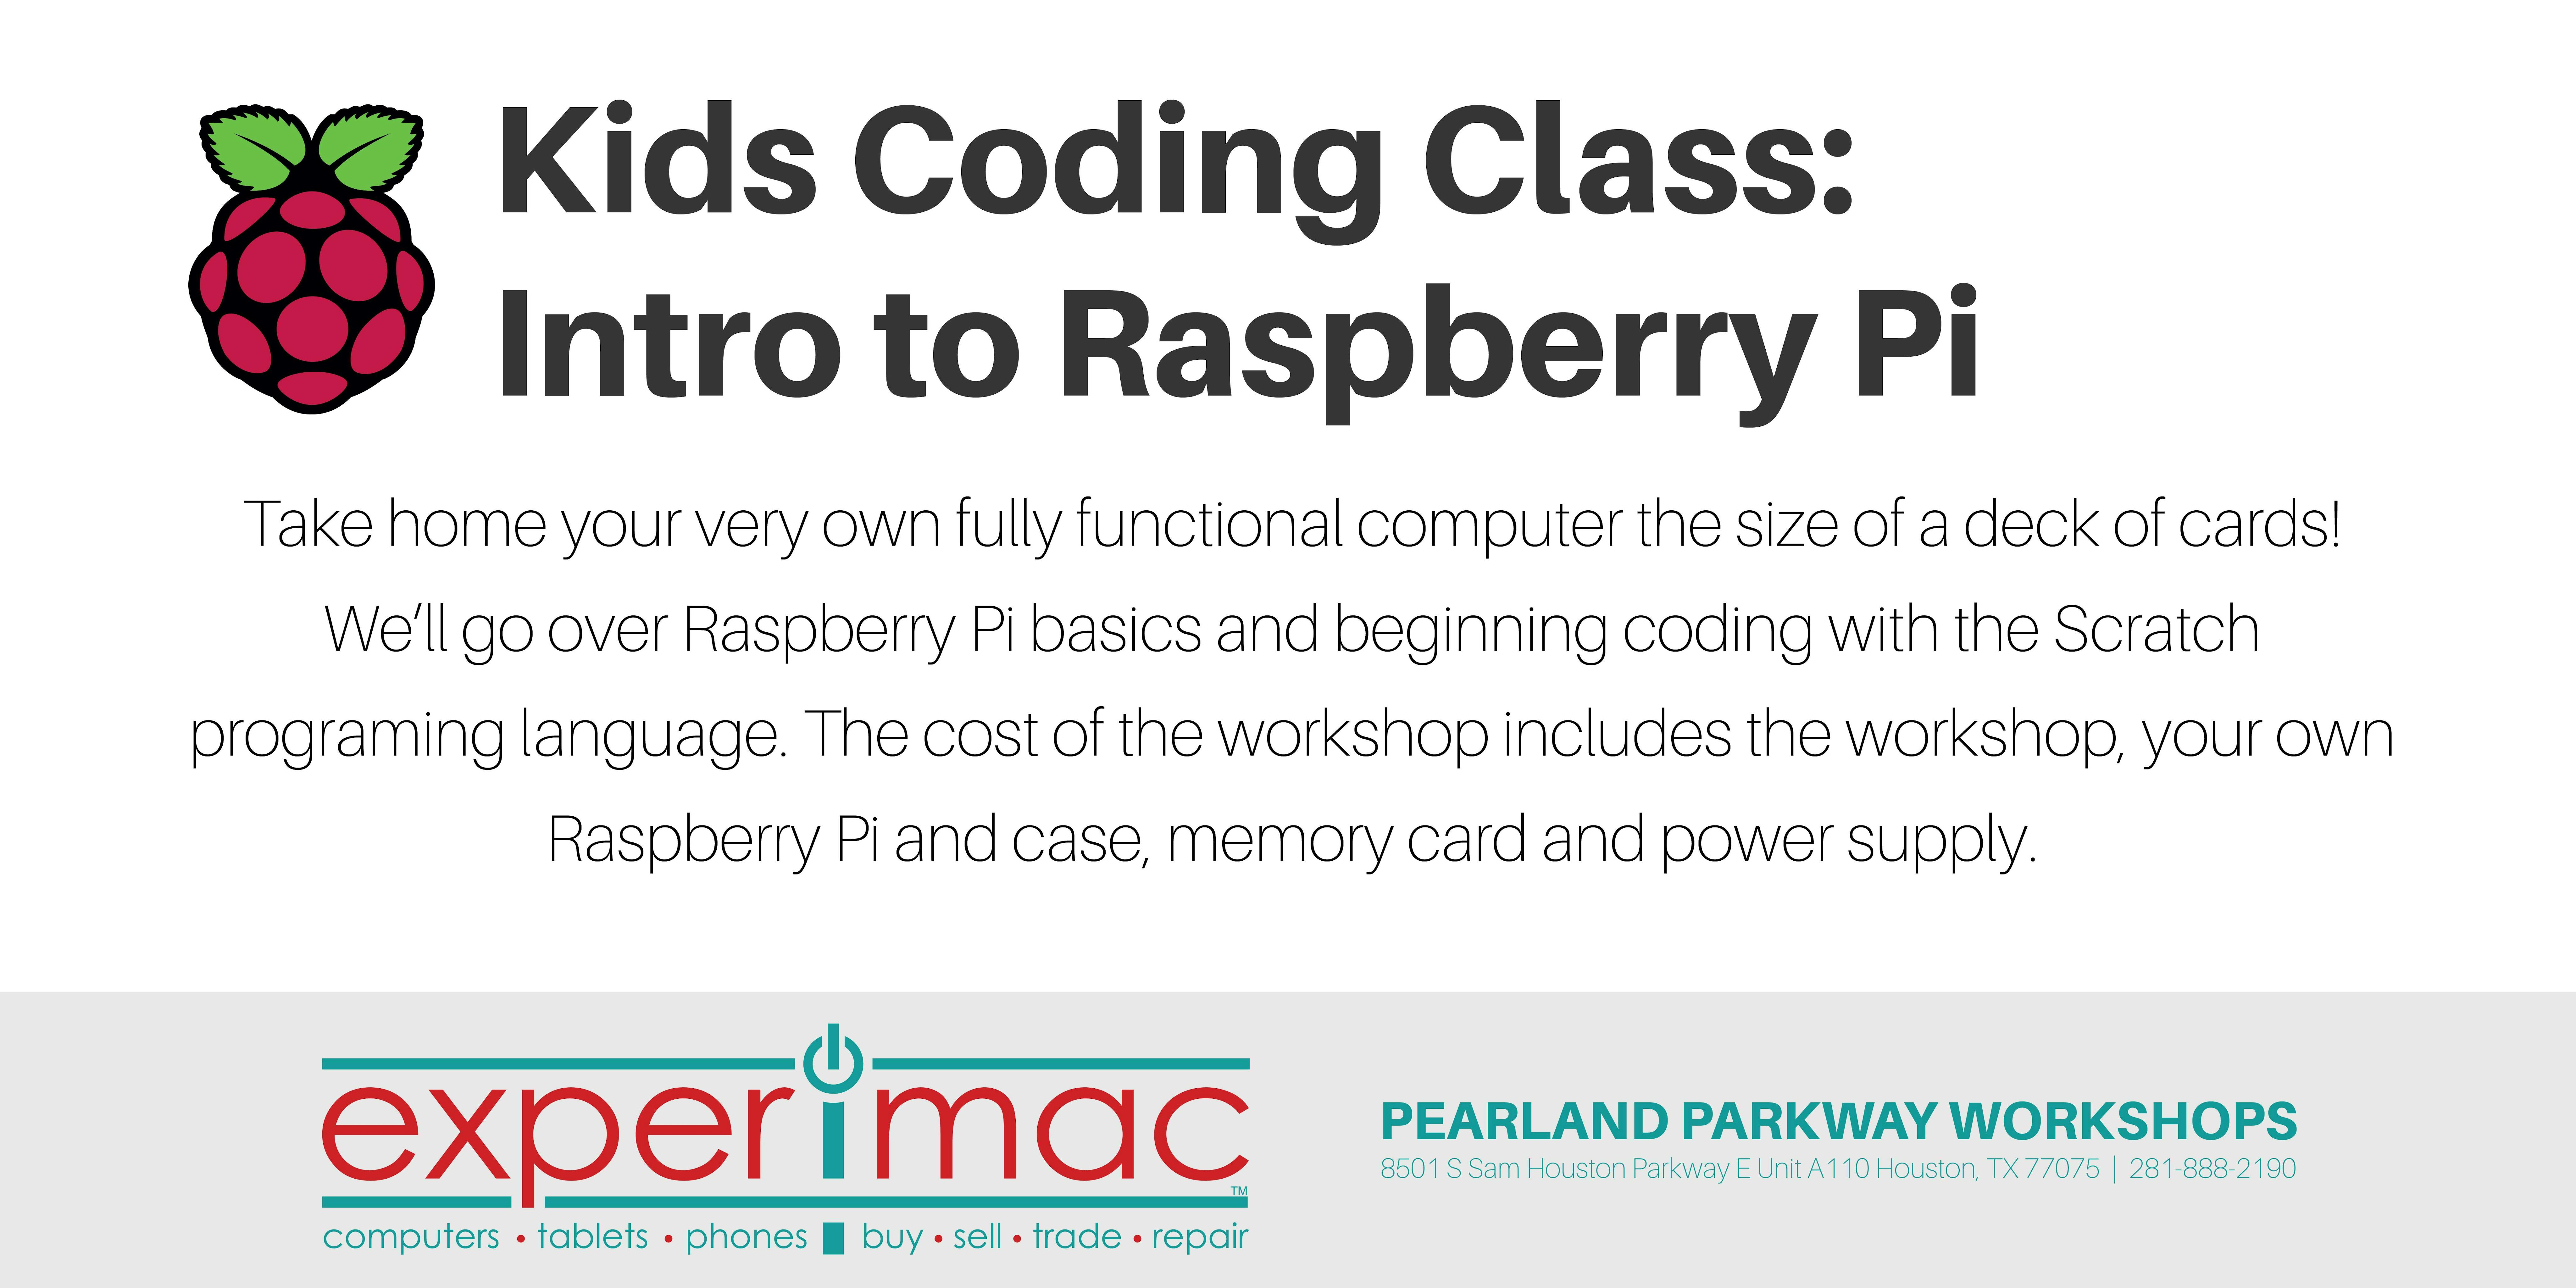 Kids Coding Class: Intro to Raspberry Pi - Experimac Pearland Parkway